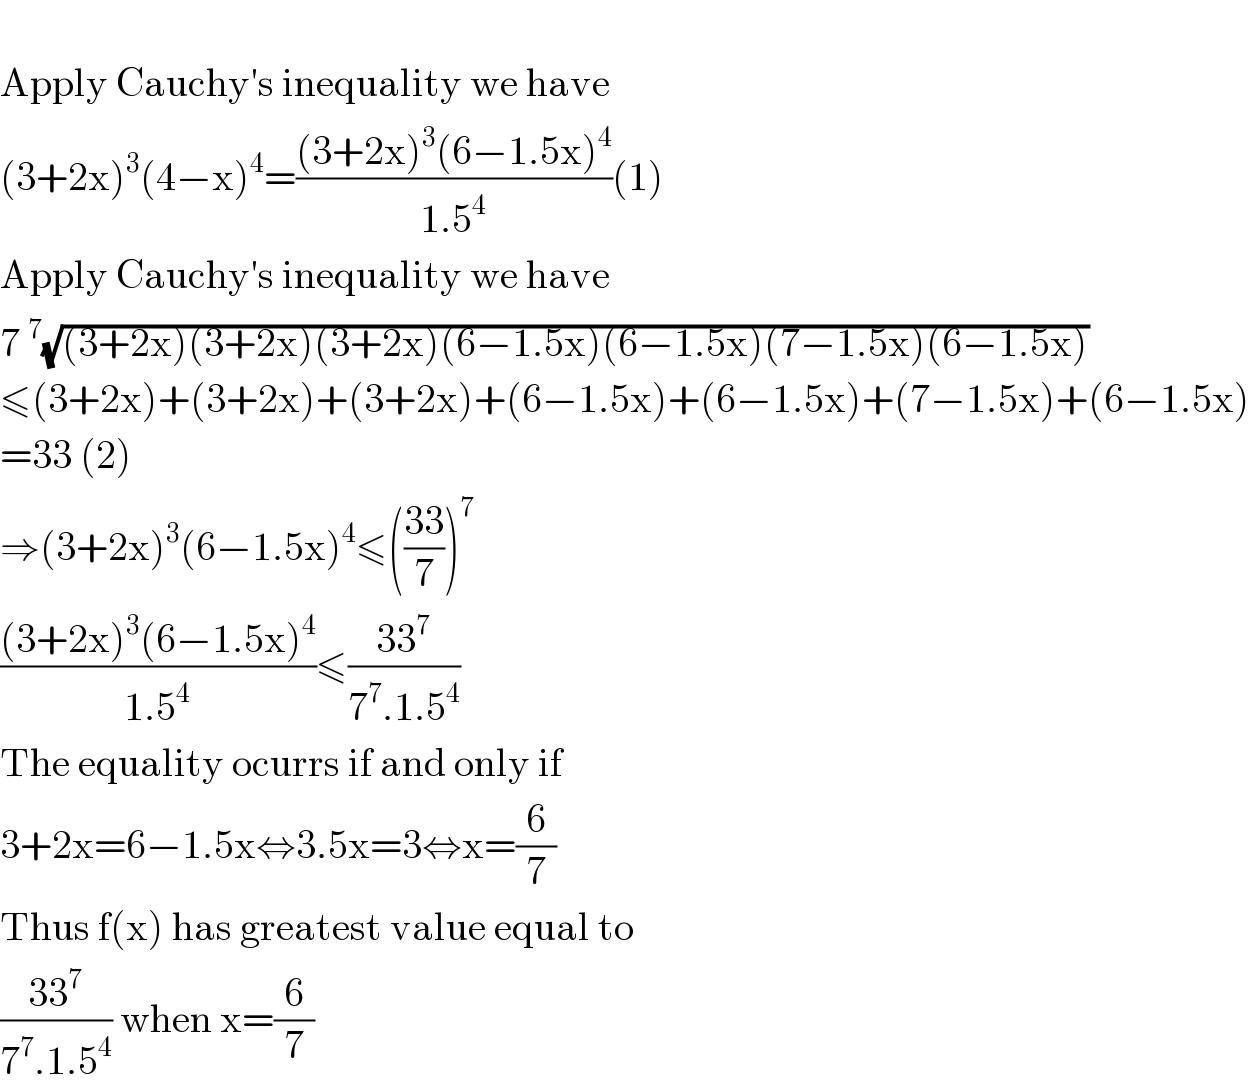   Apply Cauchy′s inequality we have  (3+2x)^3 (4−x)^4 =(((3+2x)^3 (6−1.5x)^4 )/(1.5^4 ))(1)  Apply Cauchy′s inequality we have  7^7 (√((3+2x)(3+2x)(3+2x)(6−1.5x)(6−1.5x)(7−1.5x)(6−1.5x)))  ≤(3+2x)+(3+2x)+(3+2x)+(6−1.5x)+(6−1.5x)+(7−1.5x)+(6−1.5x)  =33 (2)  ⇒(3+2x)^3 (6−1.5x)^4 ≤(((33)/7))^7   (((3+2x)^3 (6−1.5x)^4 )/(1.5^4 ))≤((33^7 )/(7^7 .1.5^4 ))  The equality ocurrs if and only if   3+2x=6−1.5x⇔3.5x=3⇔x=(6/7)  Thus f(x) has greatest value equal to  ((33^7 )/(7^7 .1.5^4 )) when x=(6/7)  